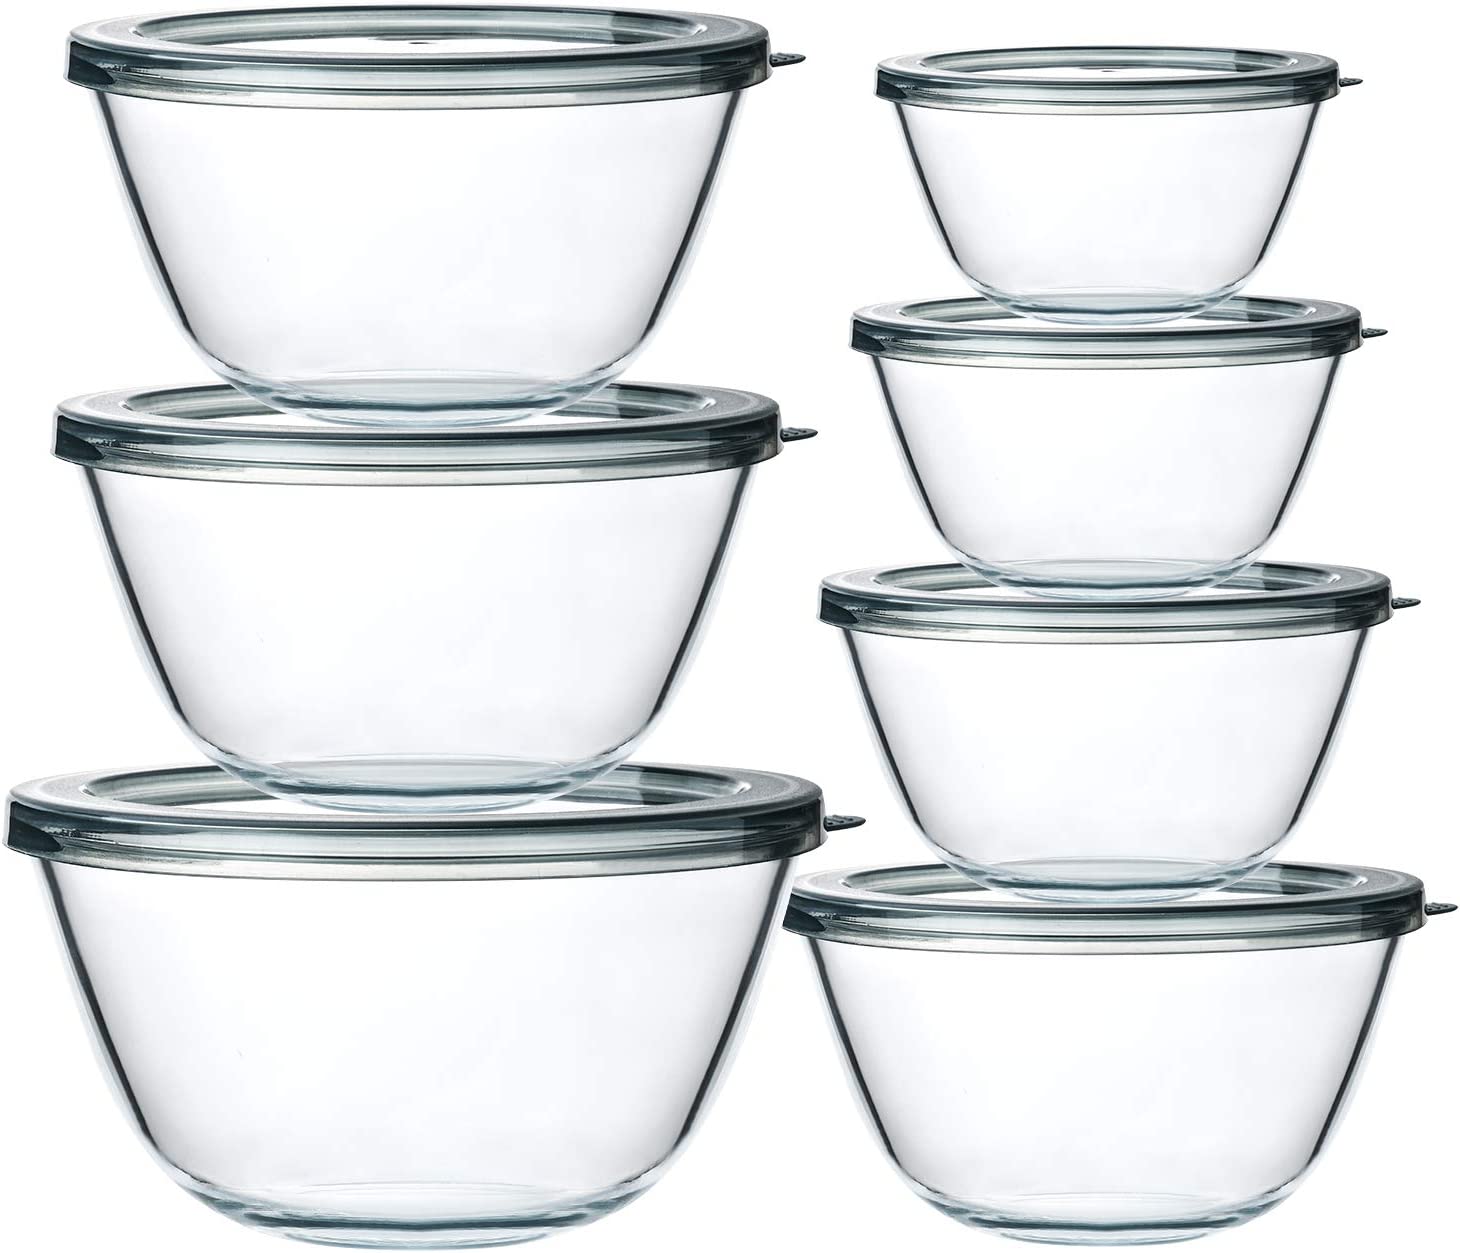 https://www.dontwasteyourmoney.com/wp-content/uploads/2023/05/mcirco-chip-resistant-borosilicate-glass-bowls-with-lids-7-count-bowls-with-lids.jpg